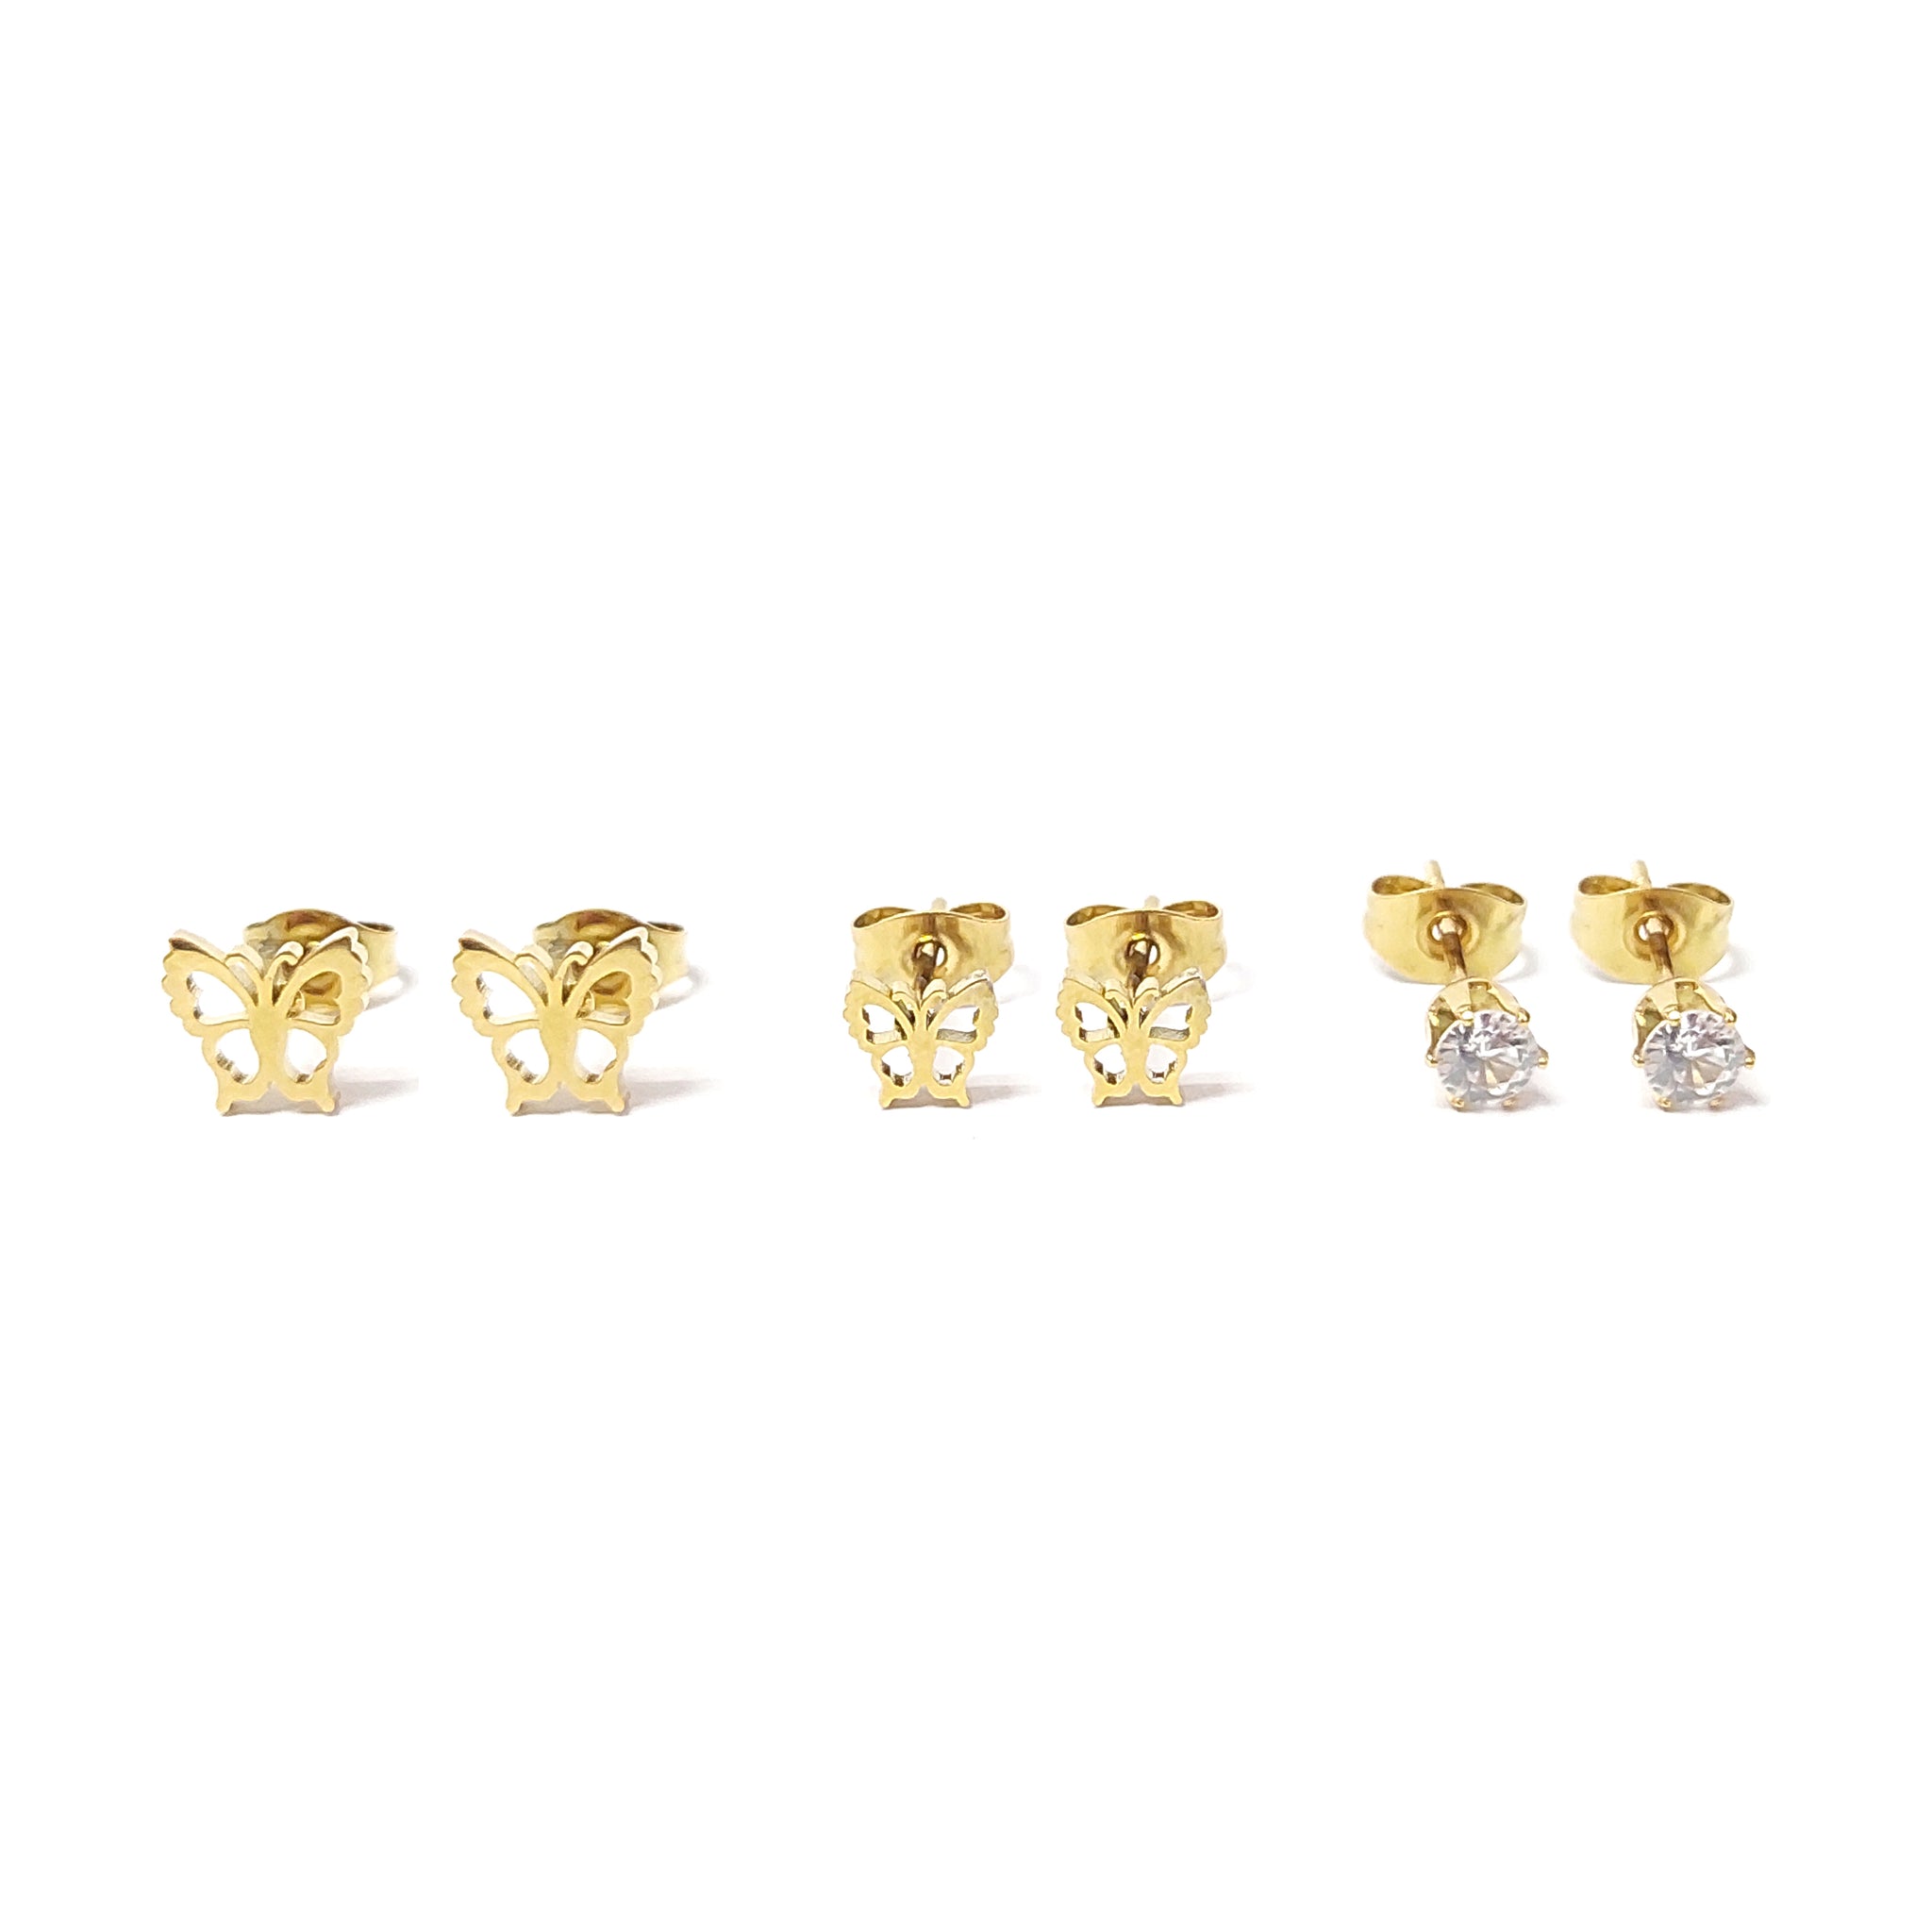 ESE 7911: All IPG 6-Pc (2x Cz + 4x Butterfly Sm-Big ) Studs Set